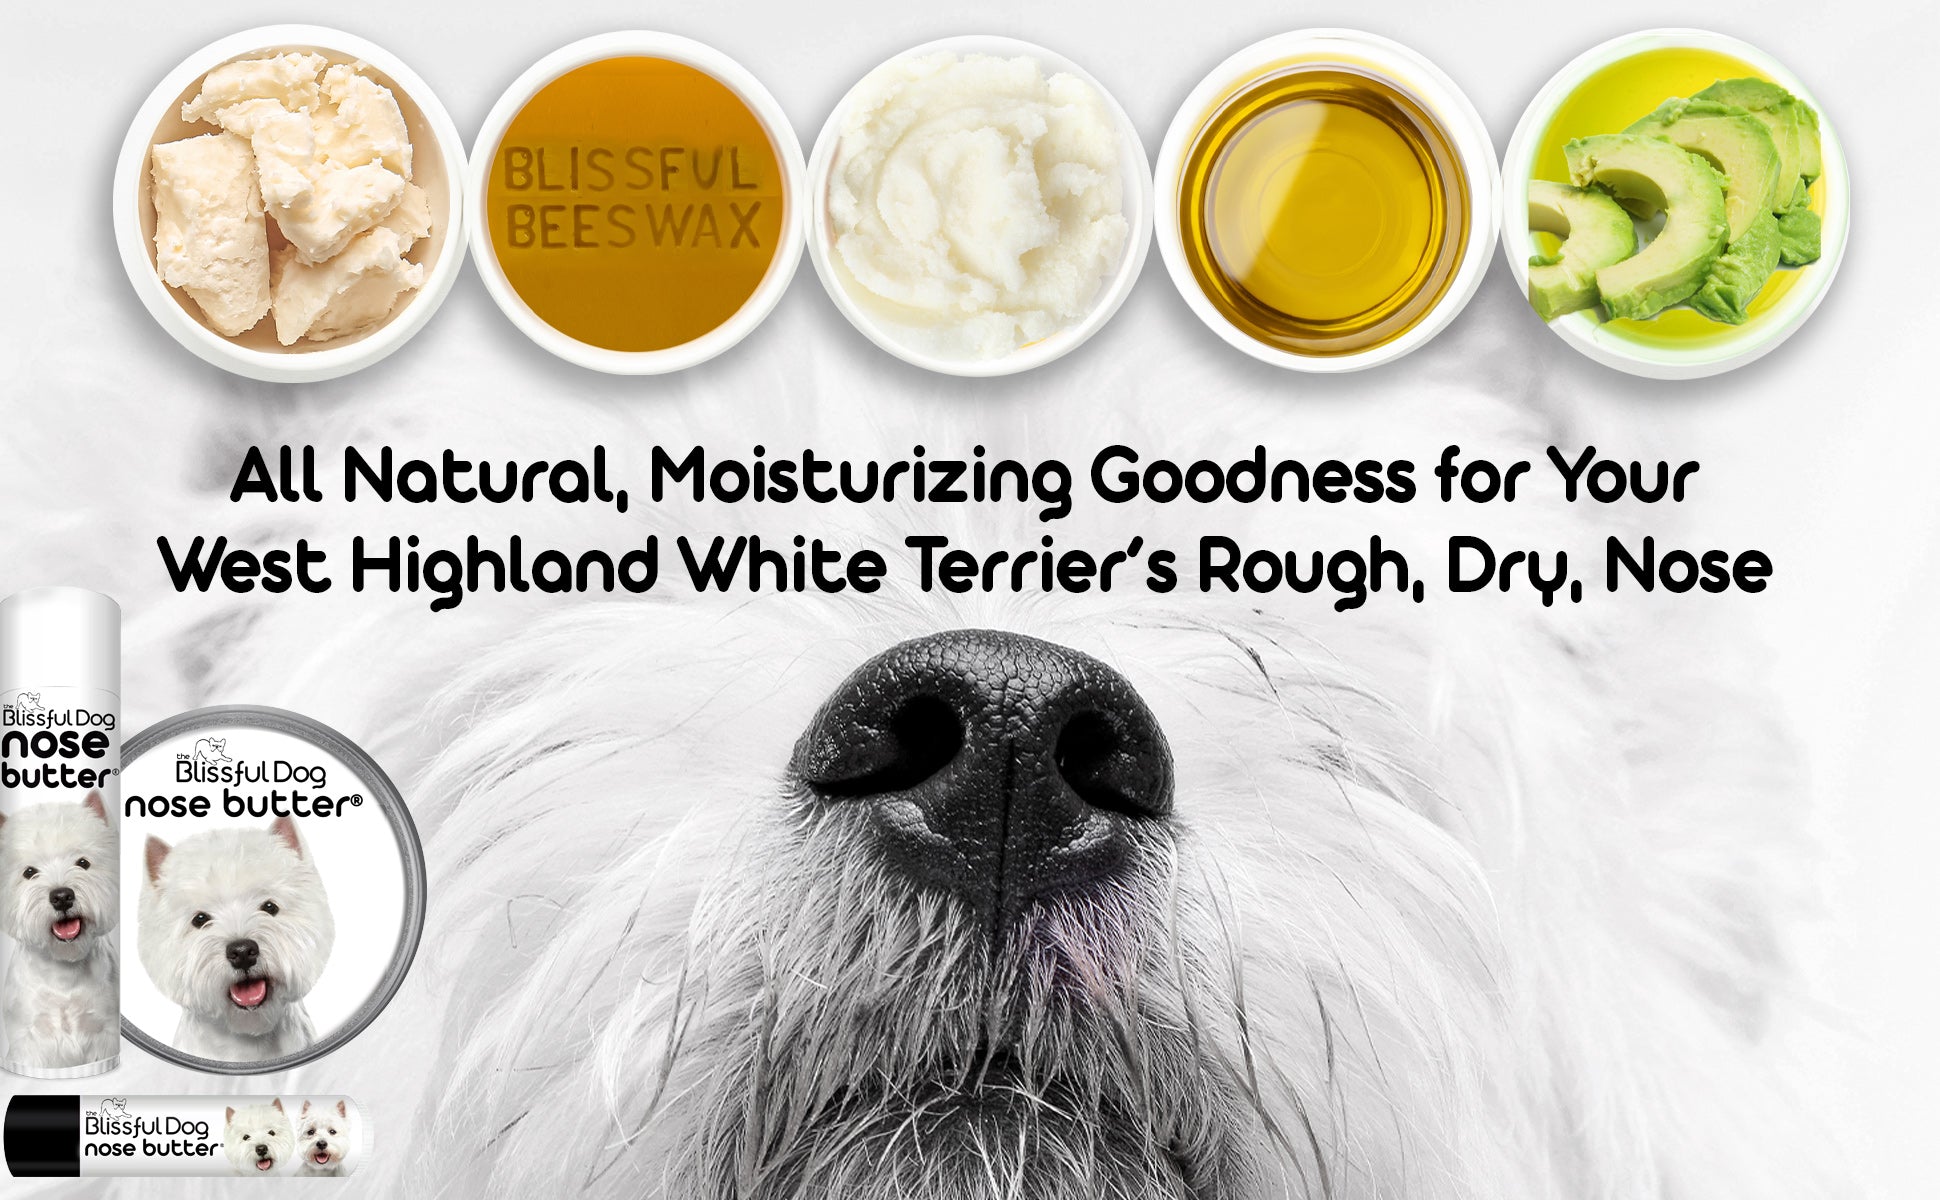 West Highland White Terrier dry nose